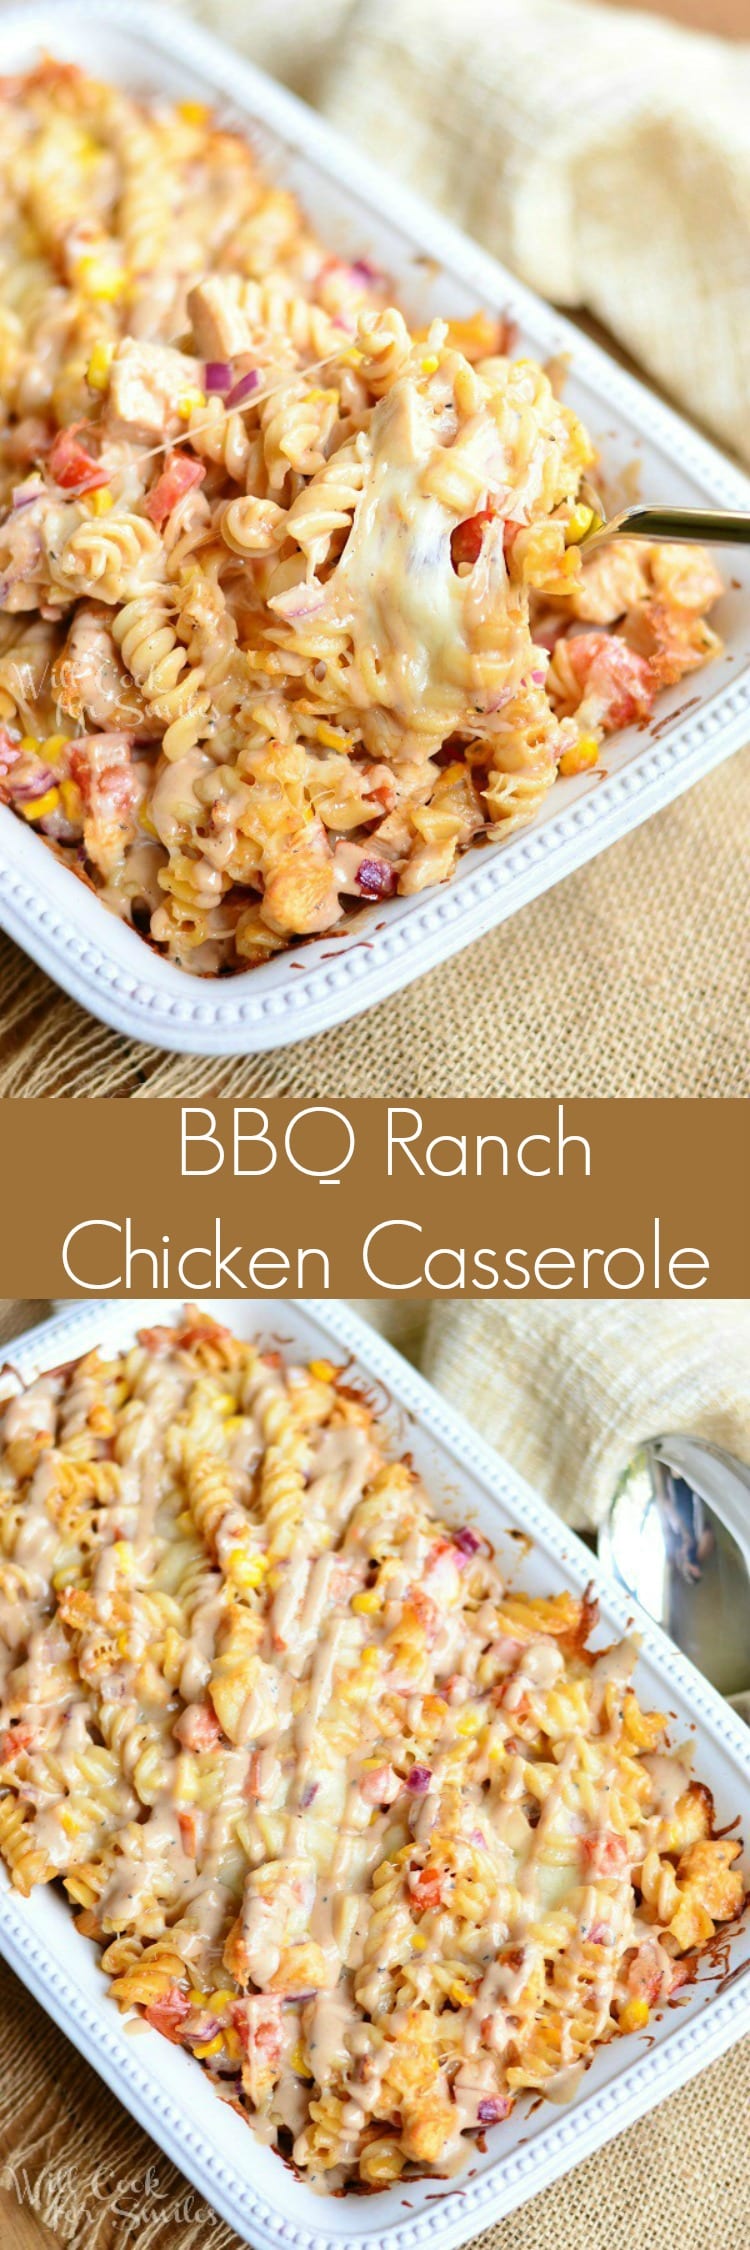 BBQ Ranch Chicken Casserole. Easy pasta casserole loaded with chicken, tomatoes, corn, red onion, and lots of cheese! This chicken, cheesy goodness is baked with BBQ ranch sauce for a  full flavor experience.